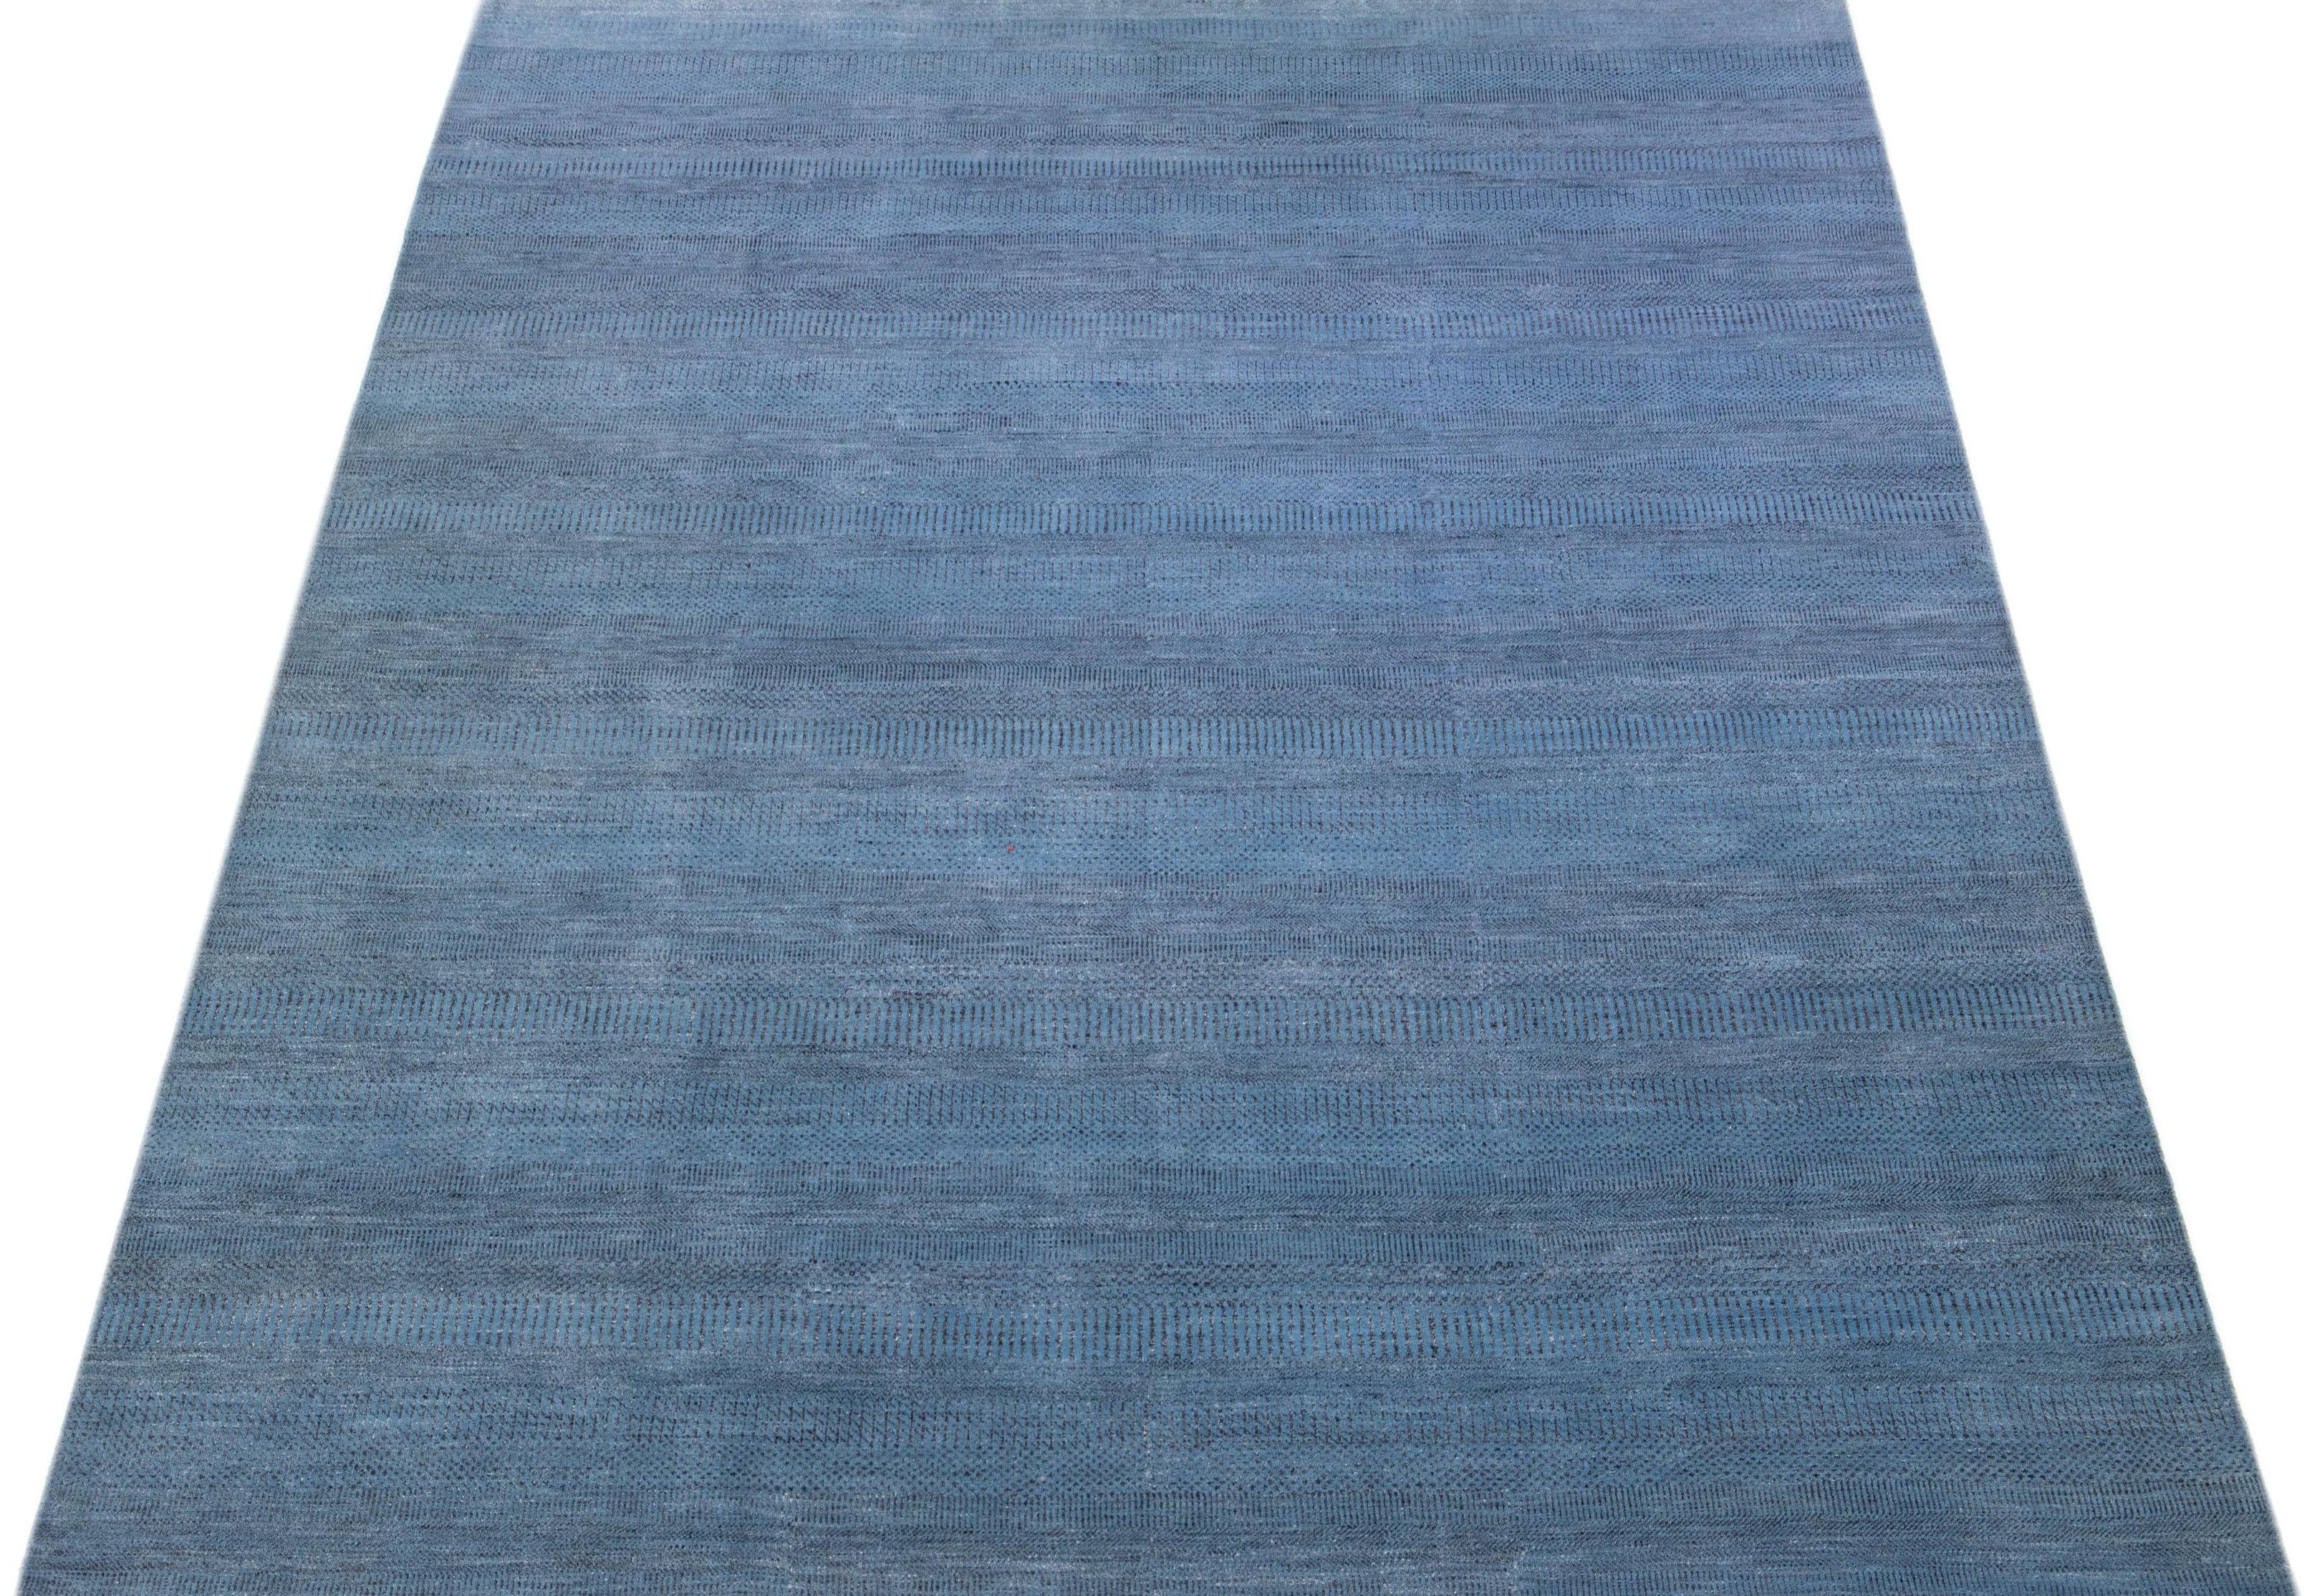 This elegant hand knotted rug is made of wool and features a subtle blue color scheme accented by an all-over geometric pattern—an ideal addition to any contemporary interior.

This rug measures 9'11